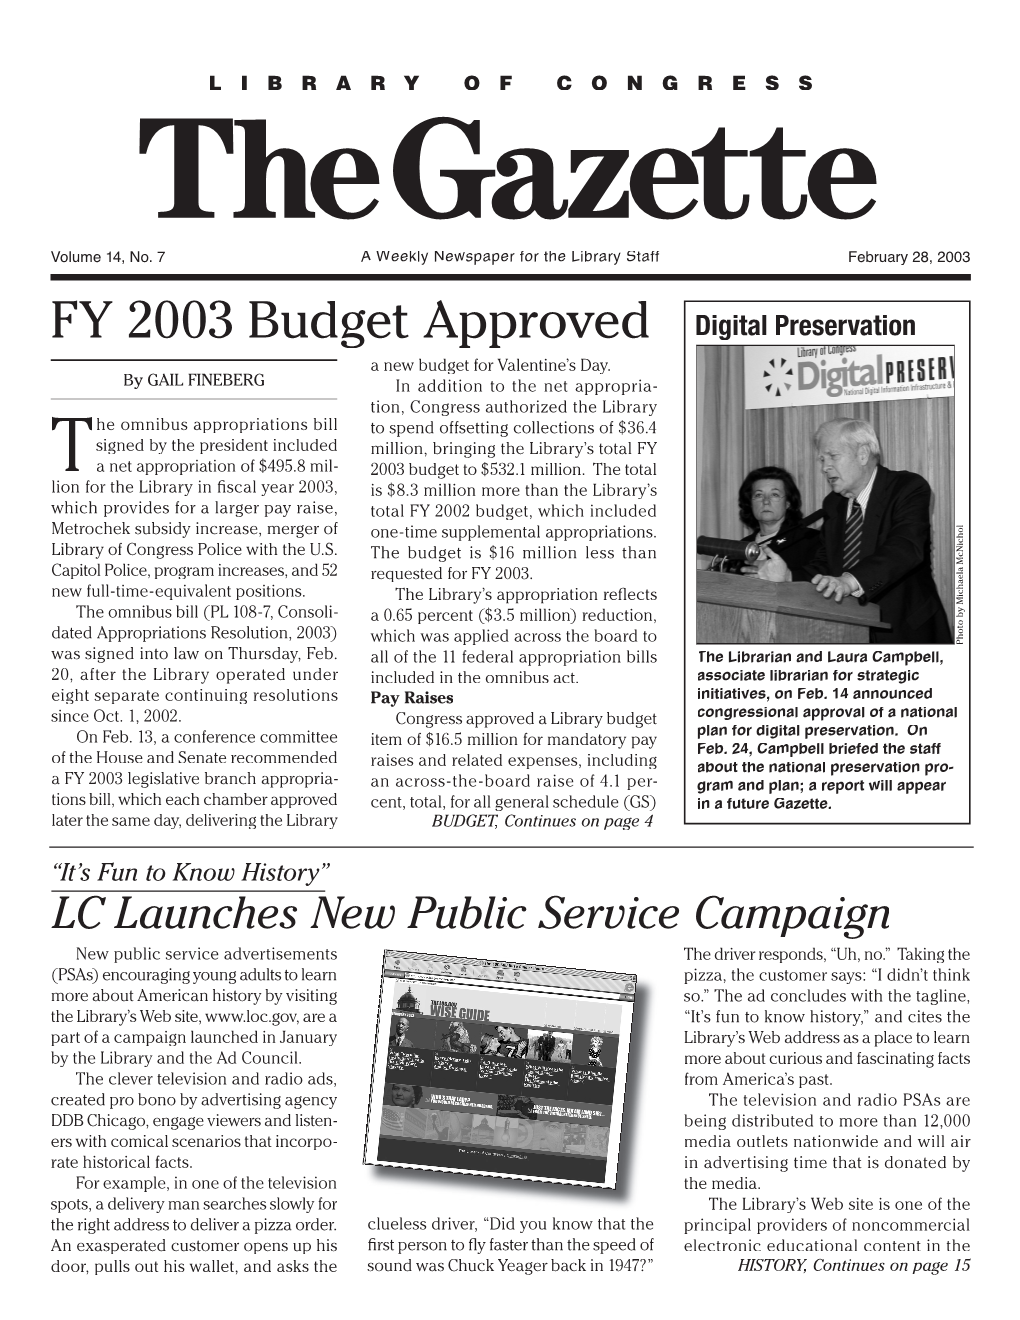 FY 2003 Budget Approved Digital Preservation a New Budget for Valentine’S Day